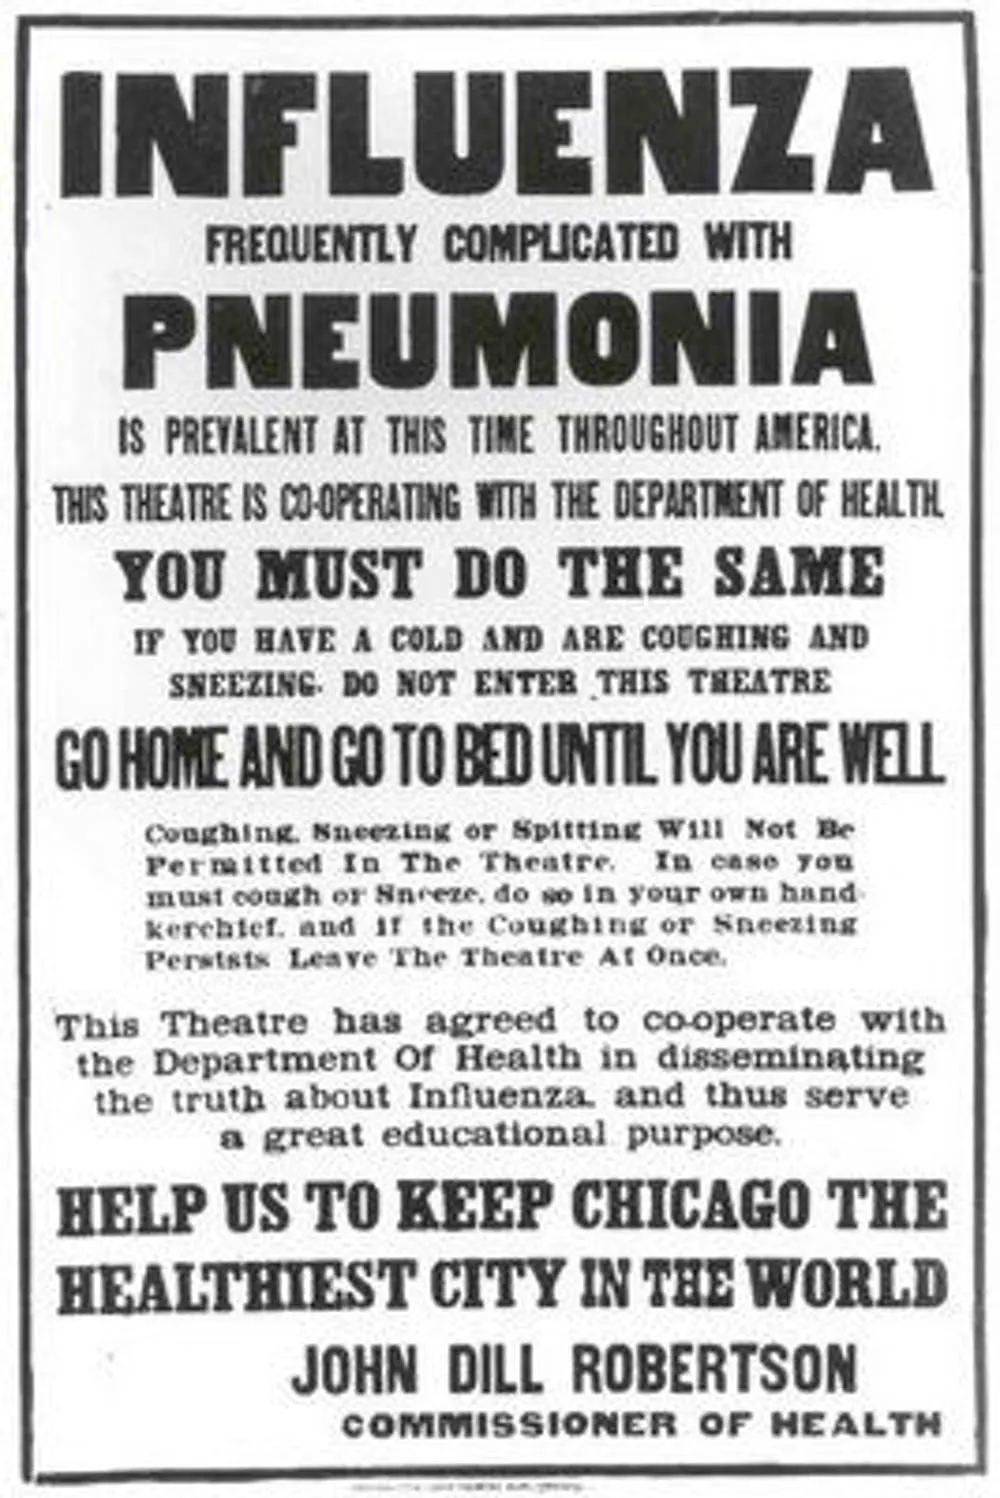 A Chicago Public Health poster outlines flu regulations during the pandemic.